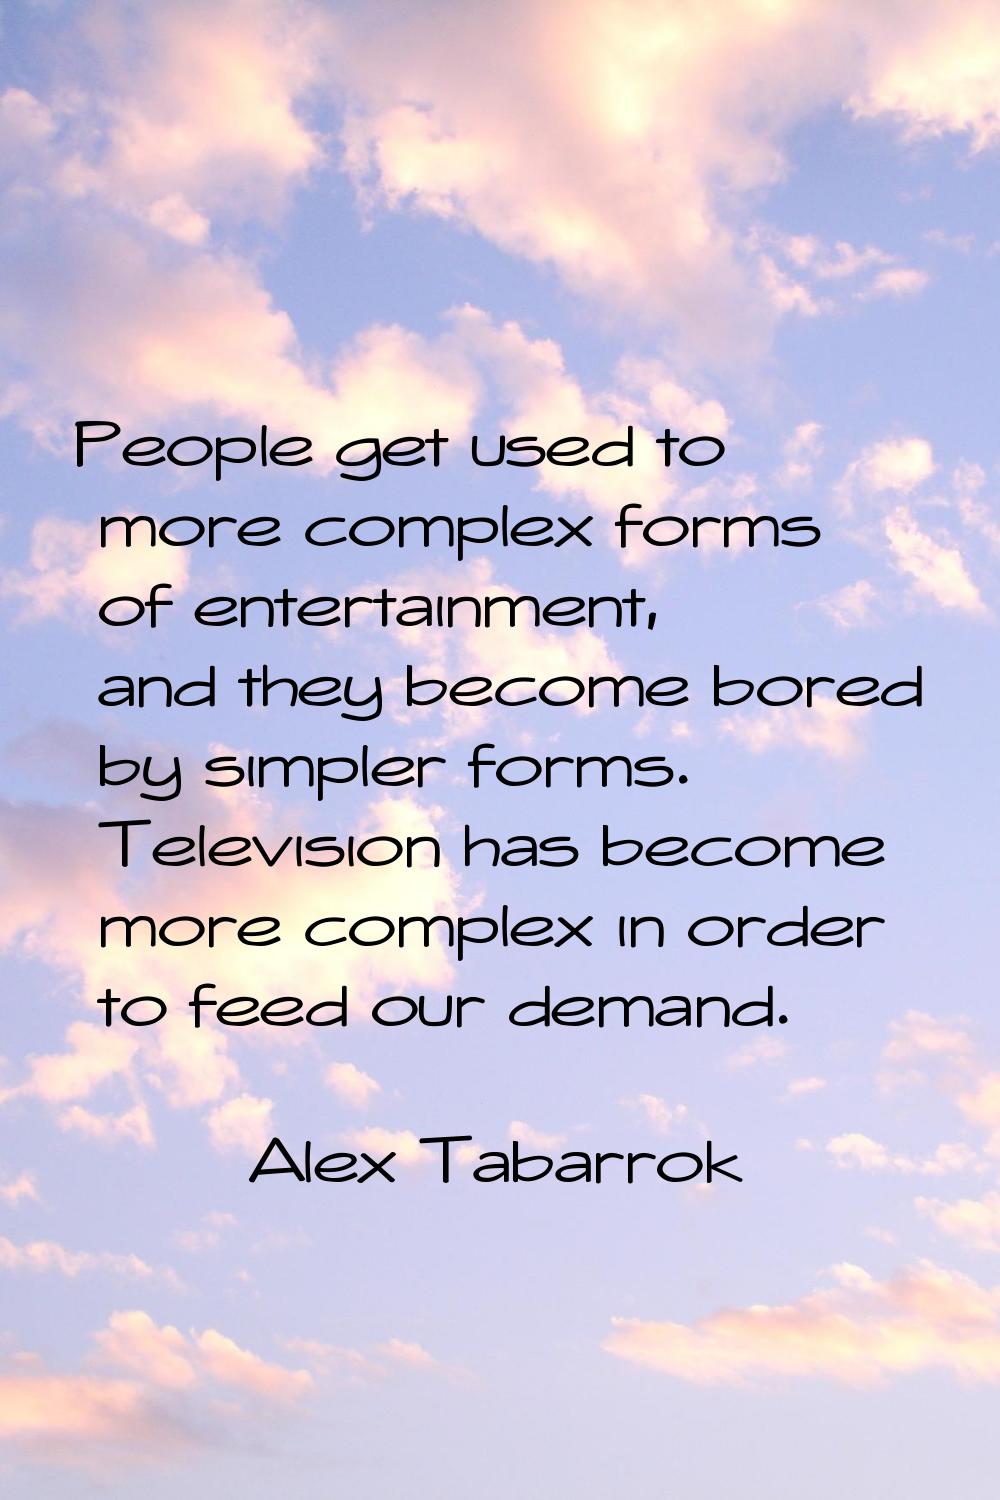 People get used to more complex forms of entertainment, and they become bored by simpler forms. Tel